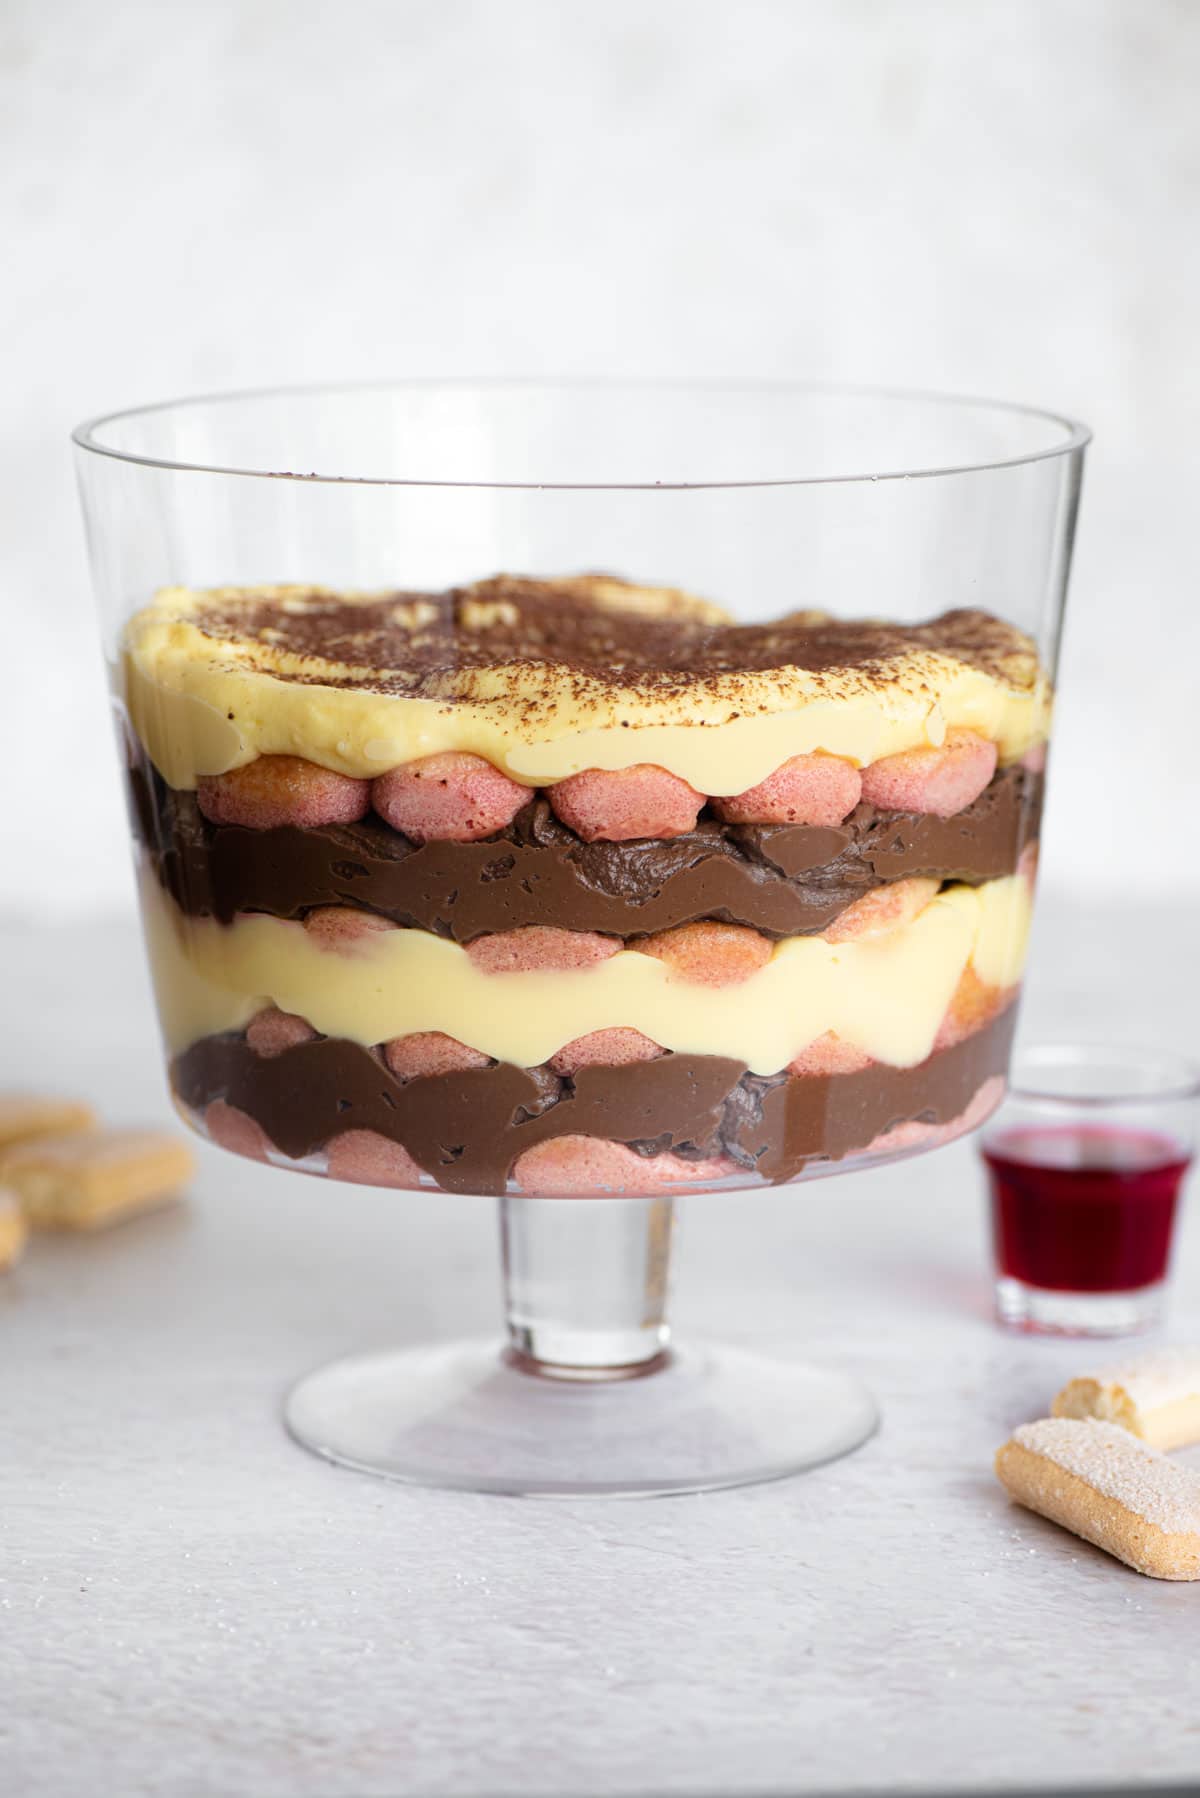 Zuppa inglese (Italian trifle) in a glass trifle dish so you can see all of the layers